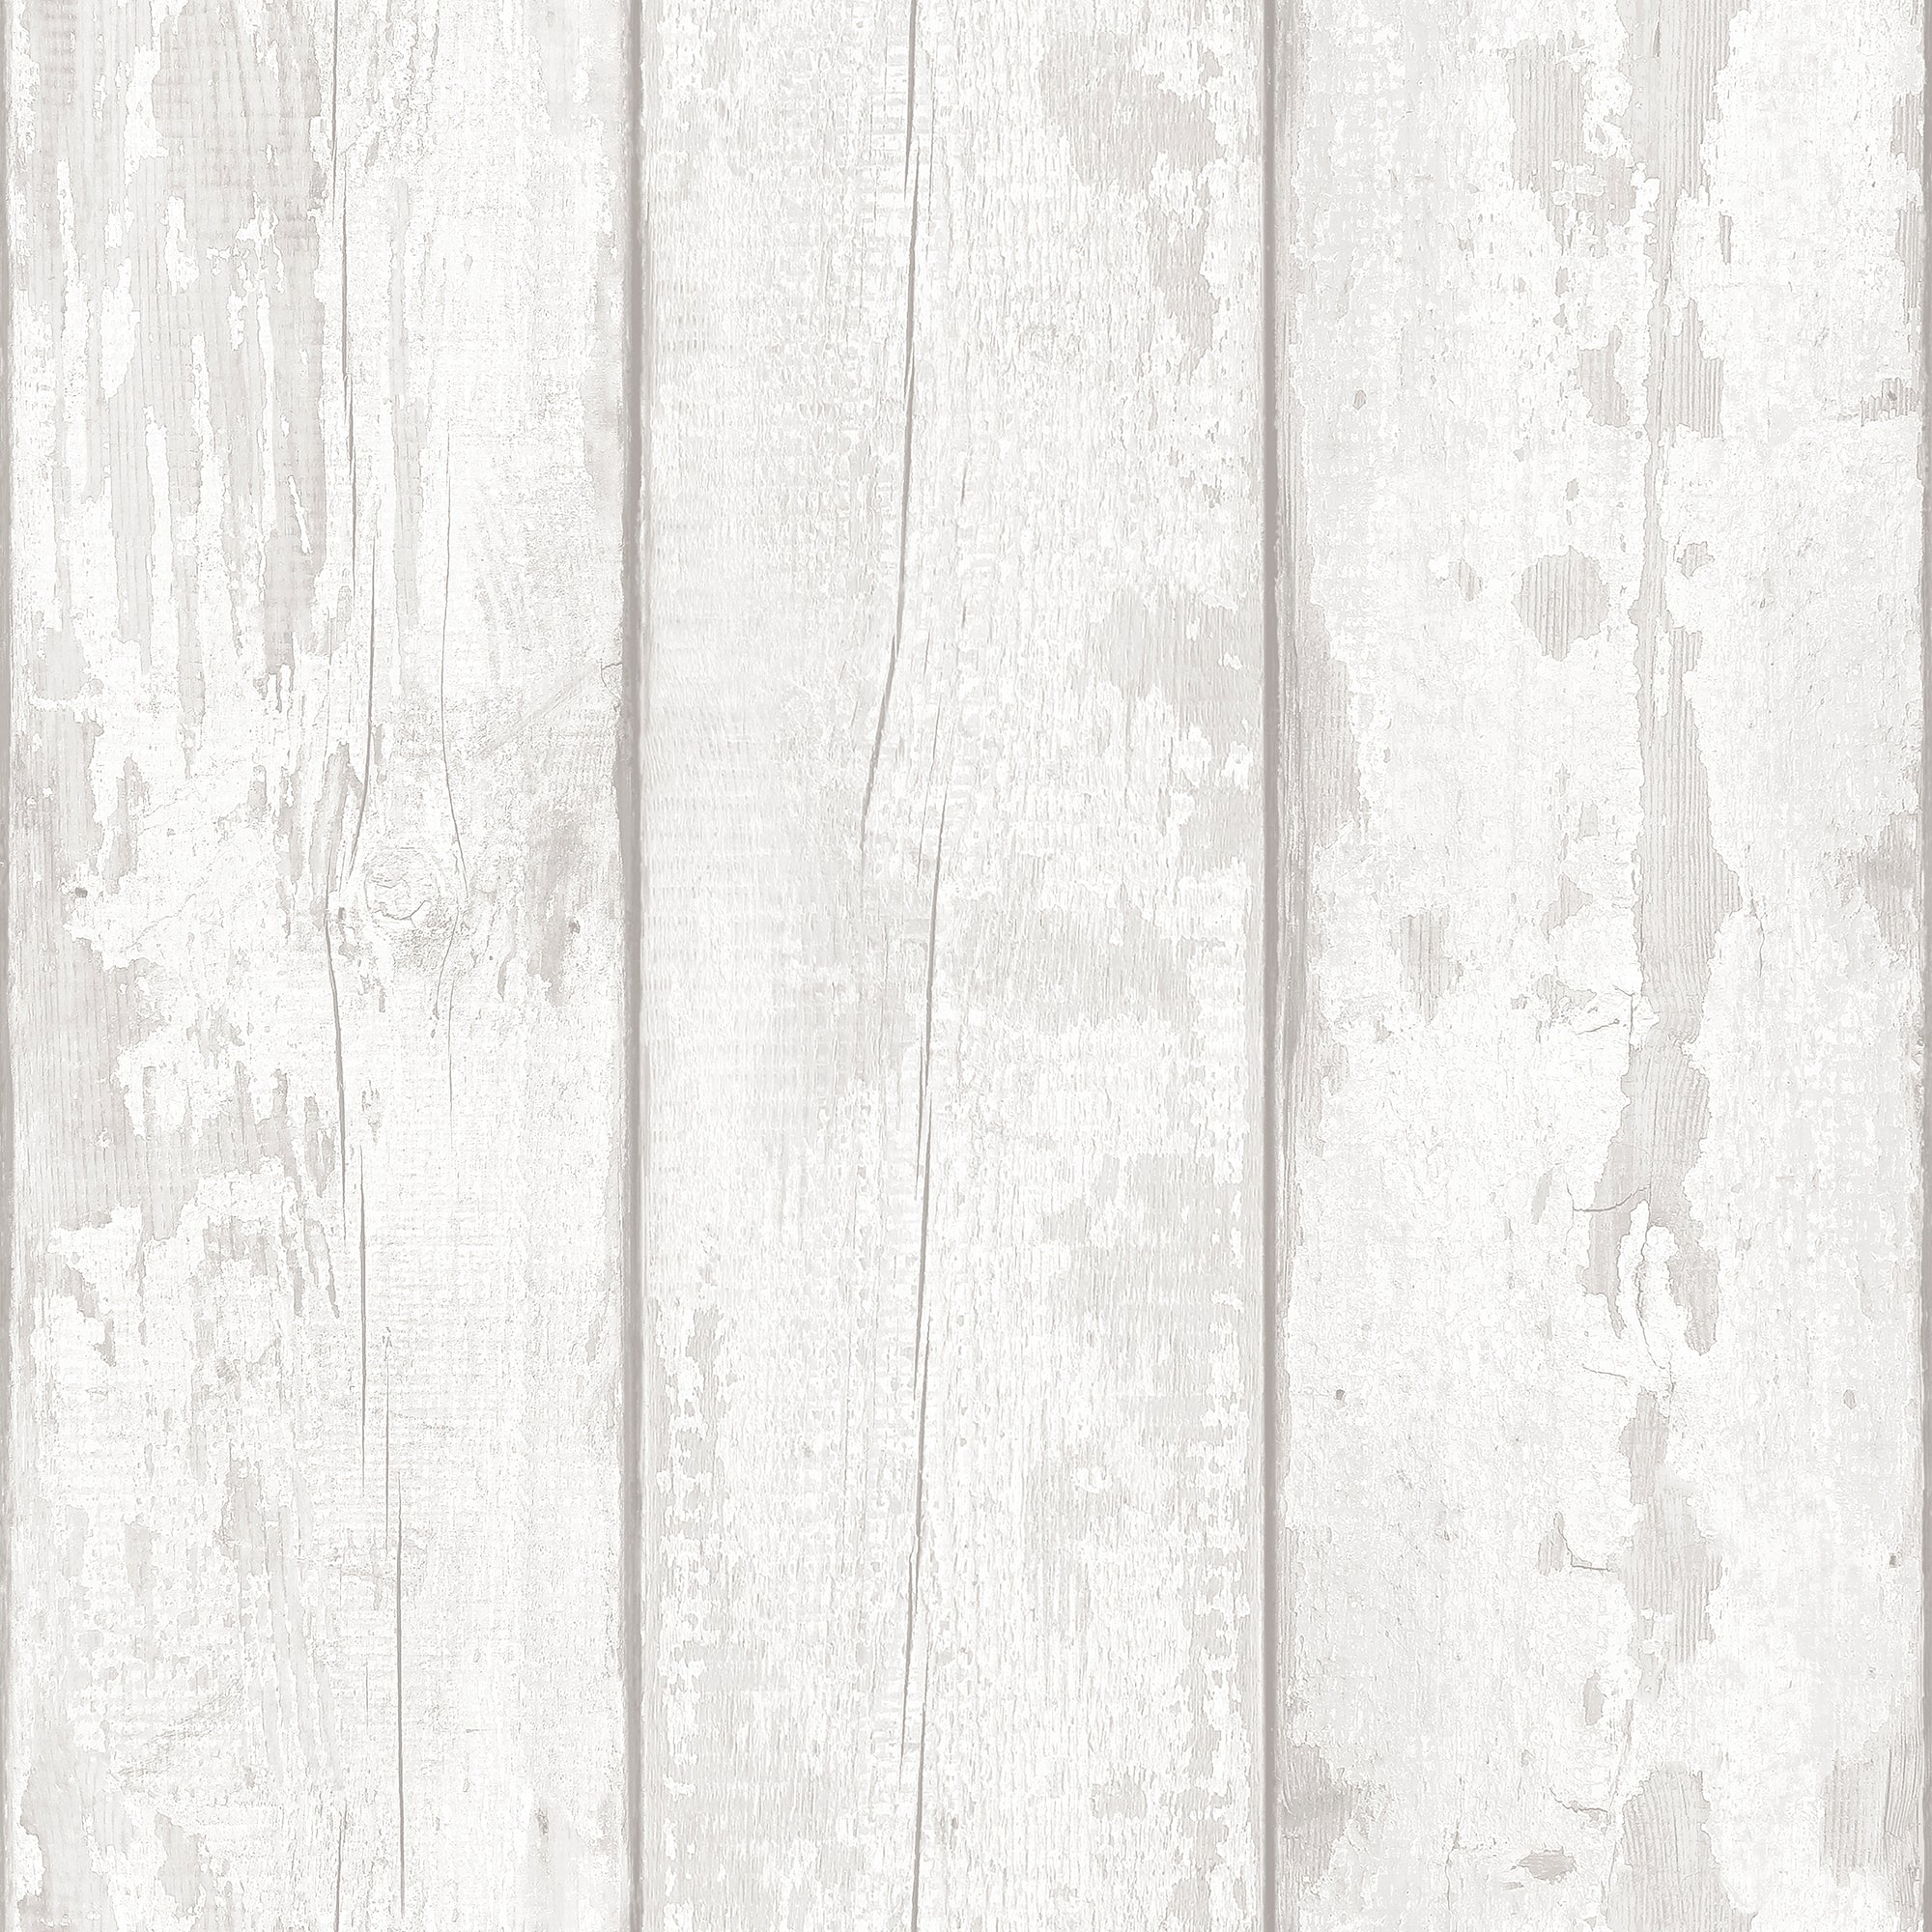 Washed Wood Wallpaper 694701 by Arthouse